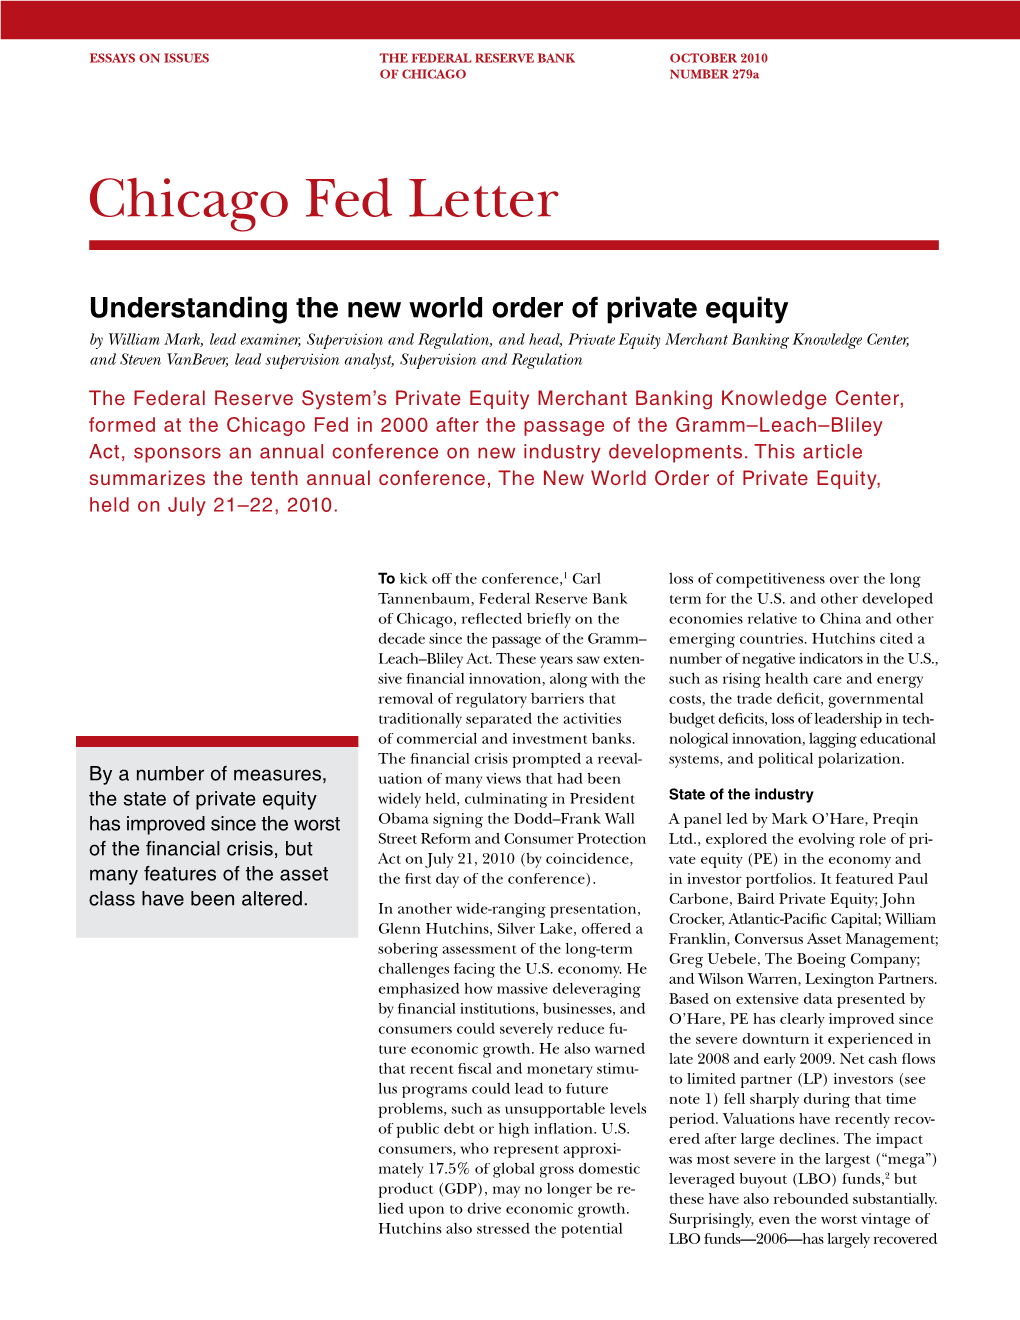 Chicago Fed Letter: Understanding the New World Order of Private